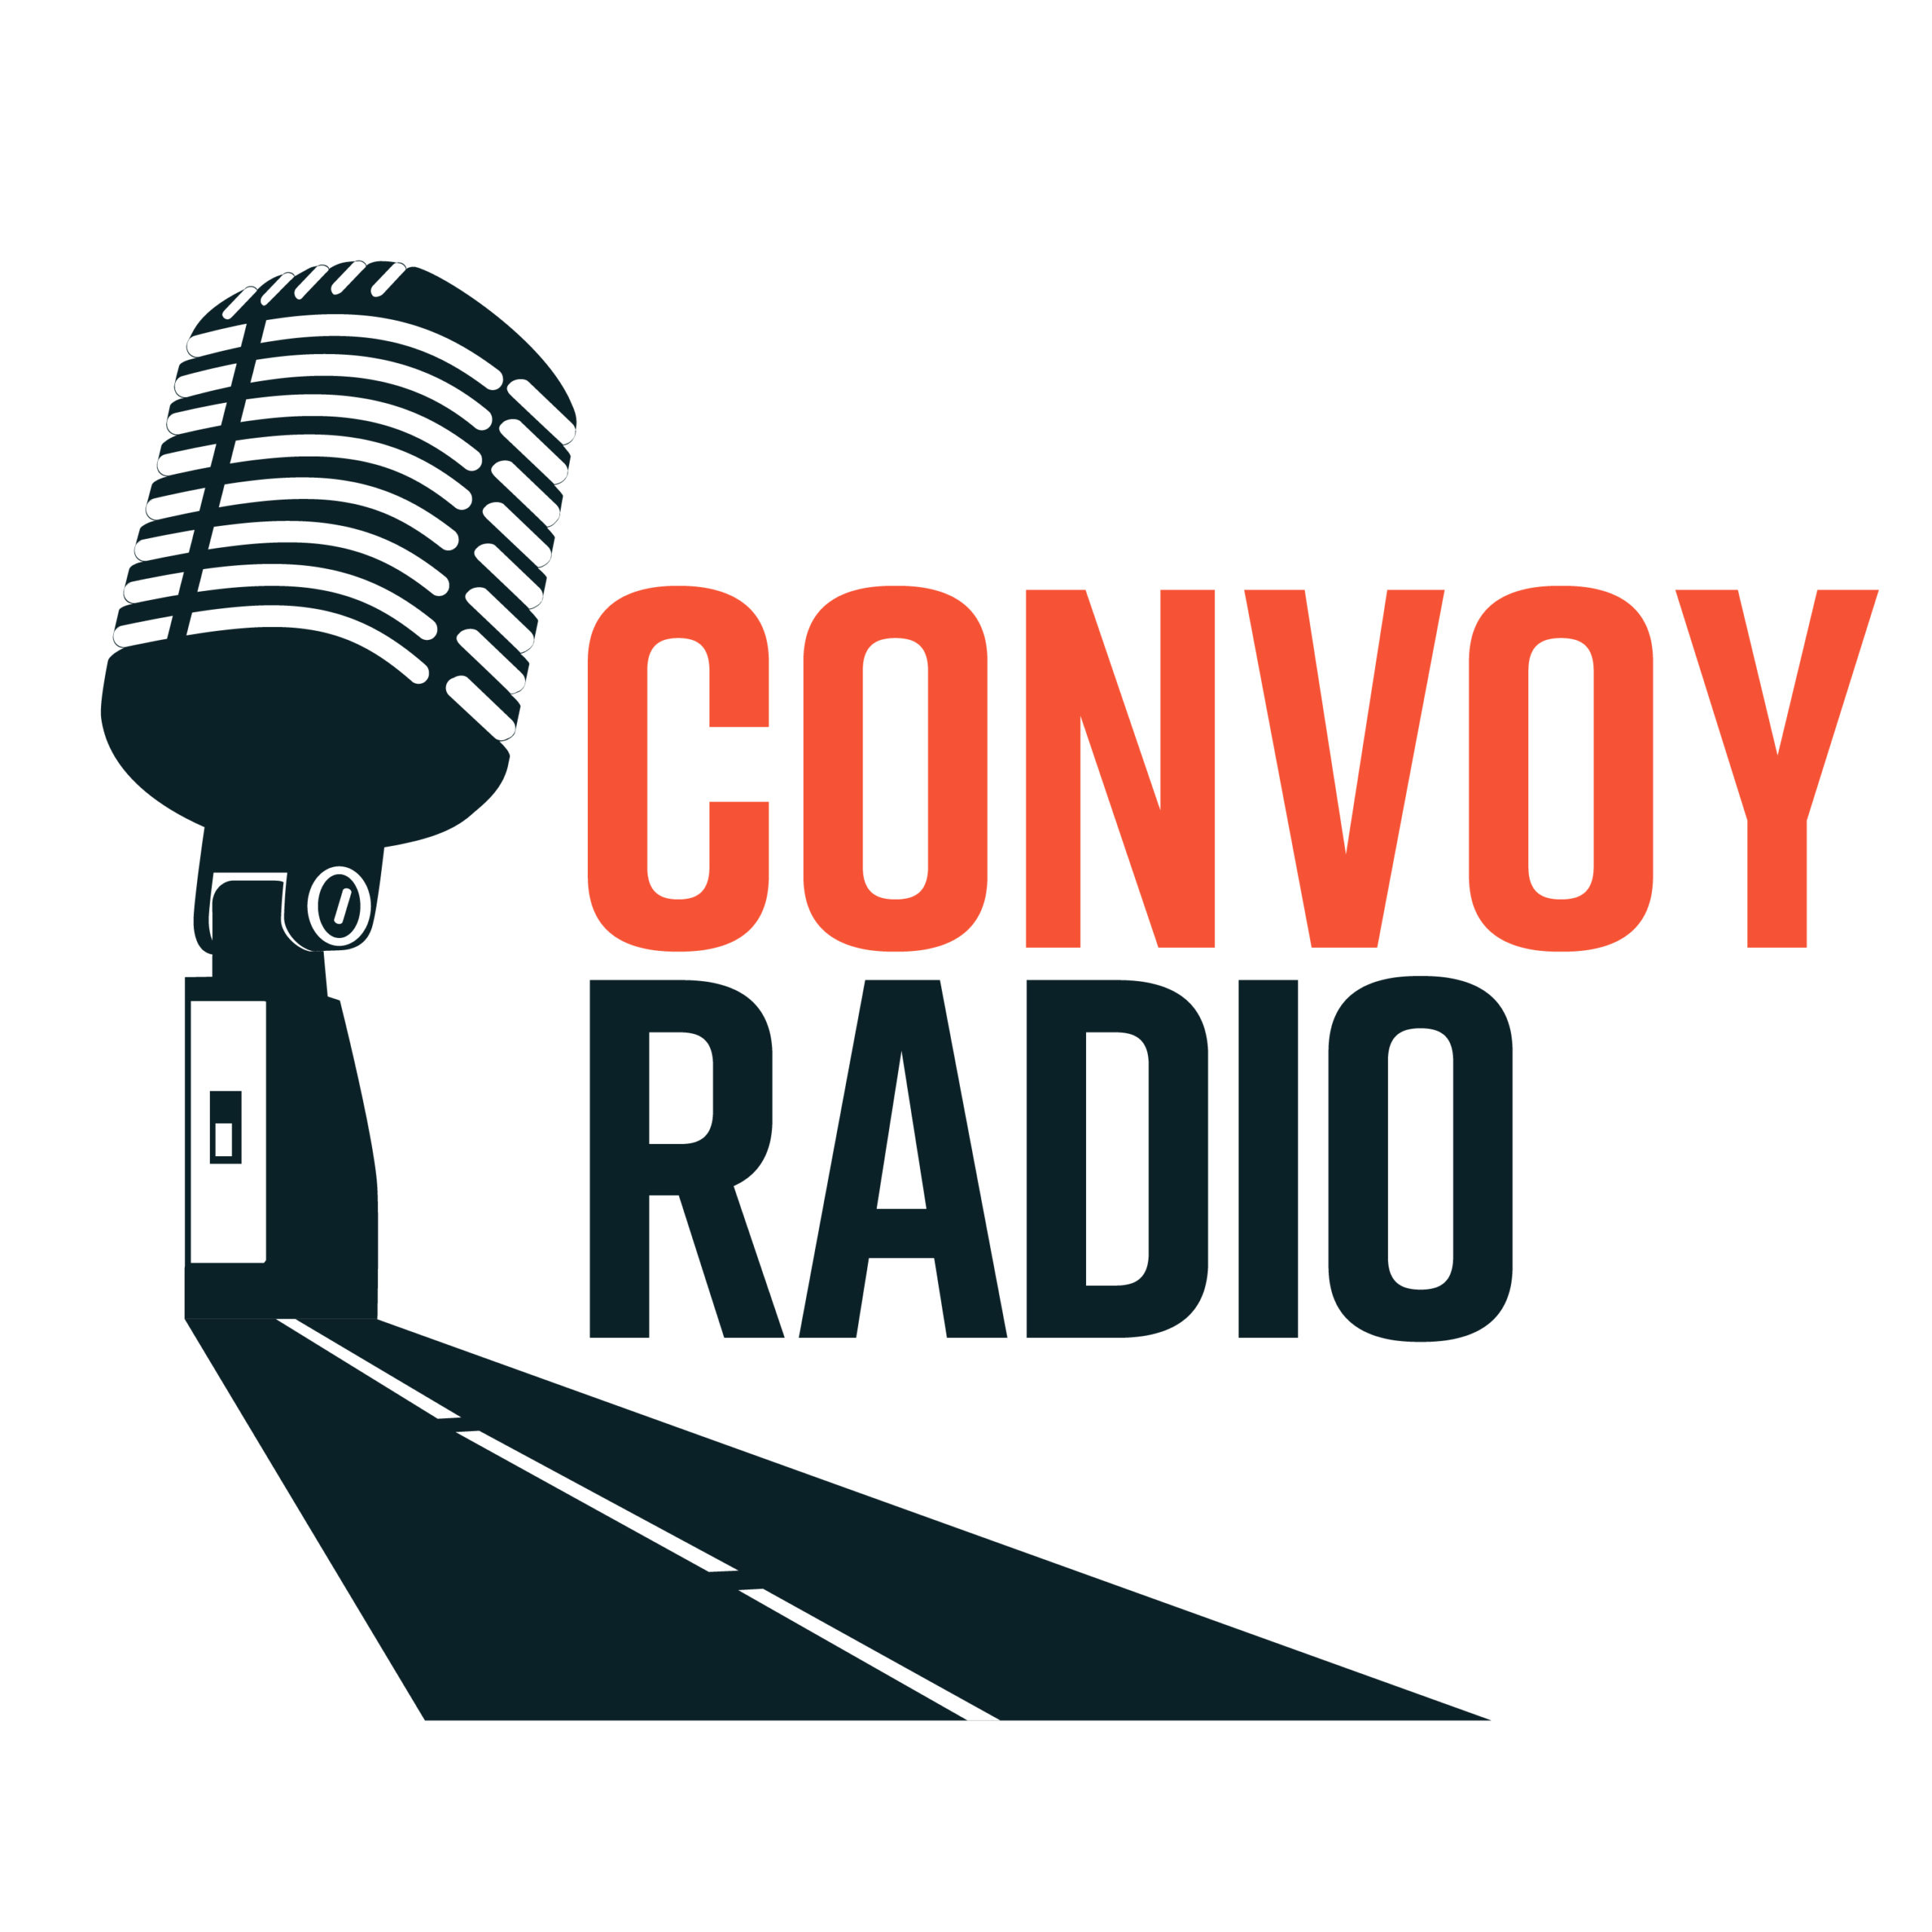 Introducing Convoy Radio, a podcast for truckers